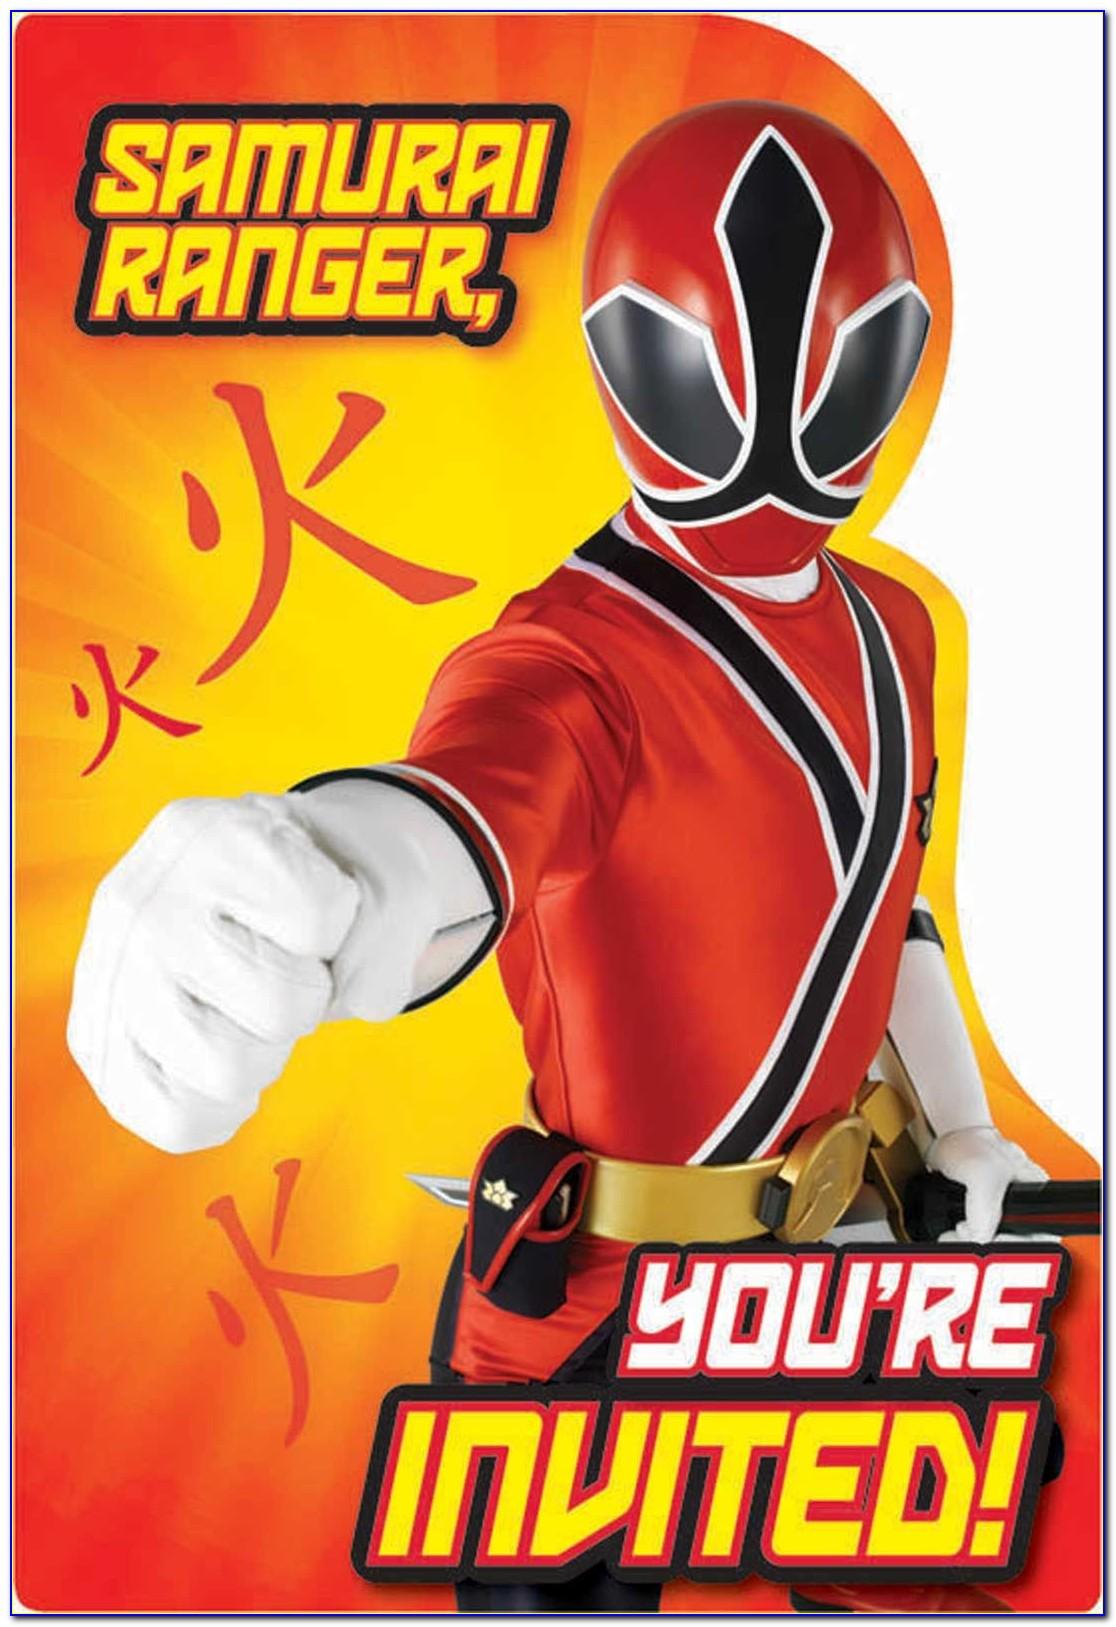 Power Ranger Party Invitation Template